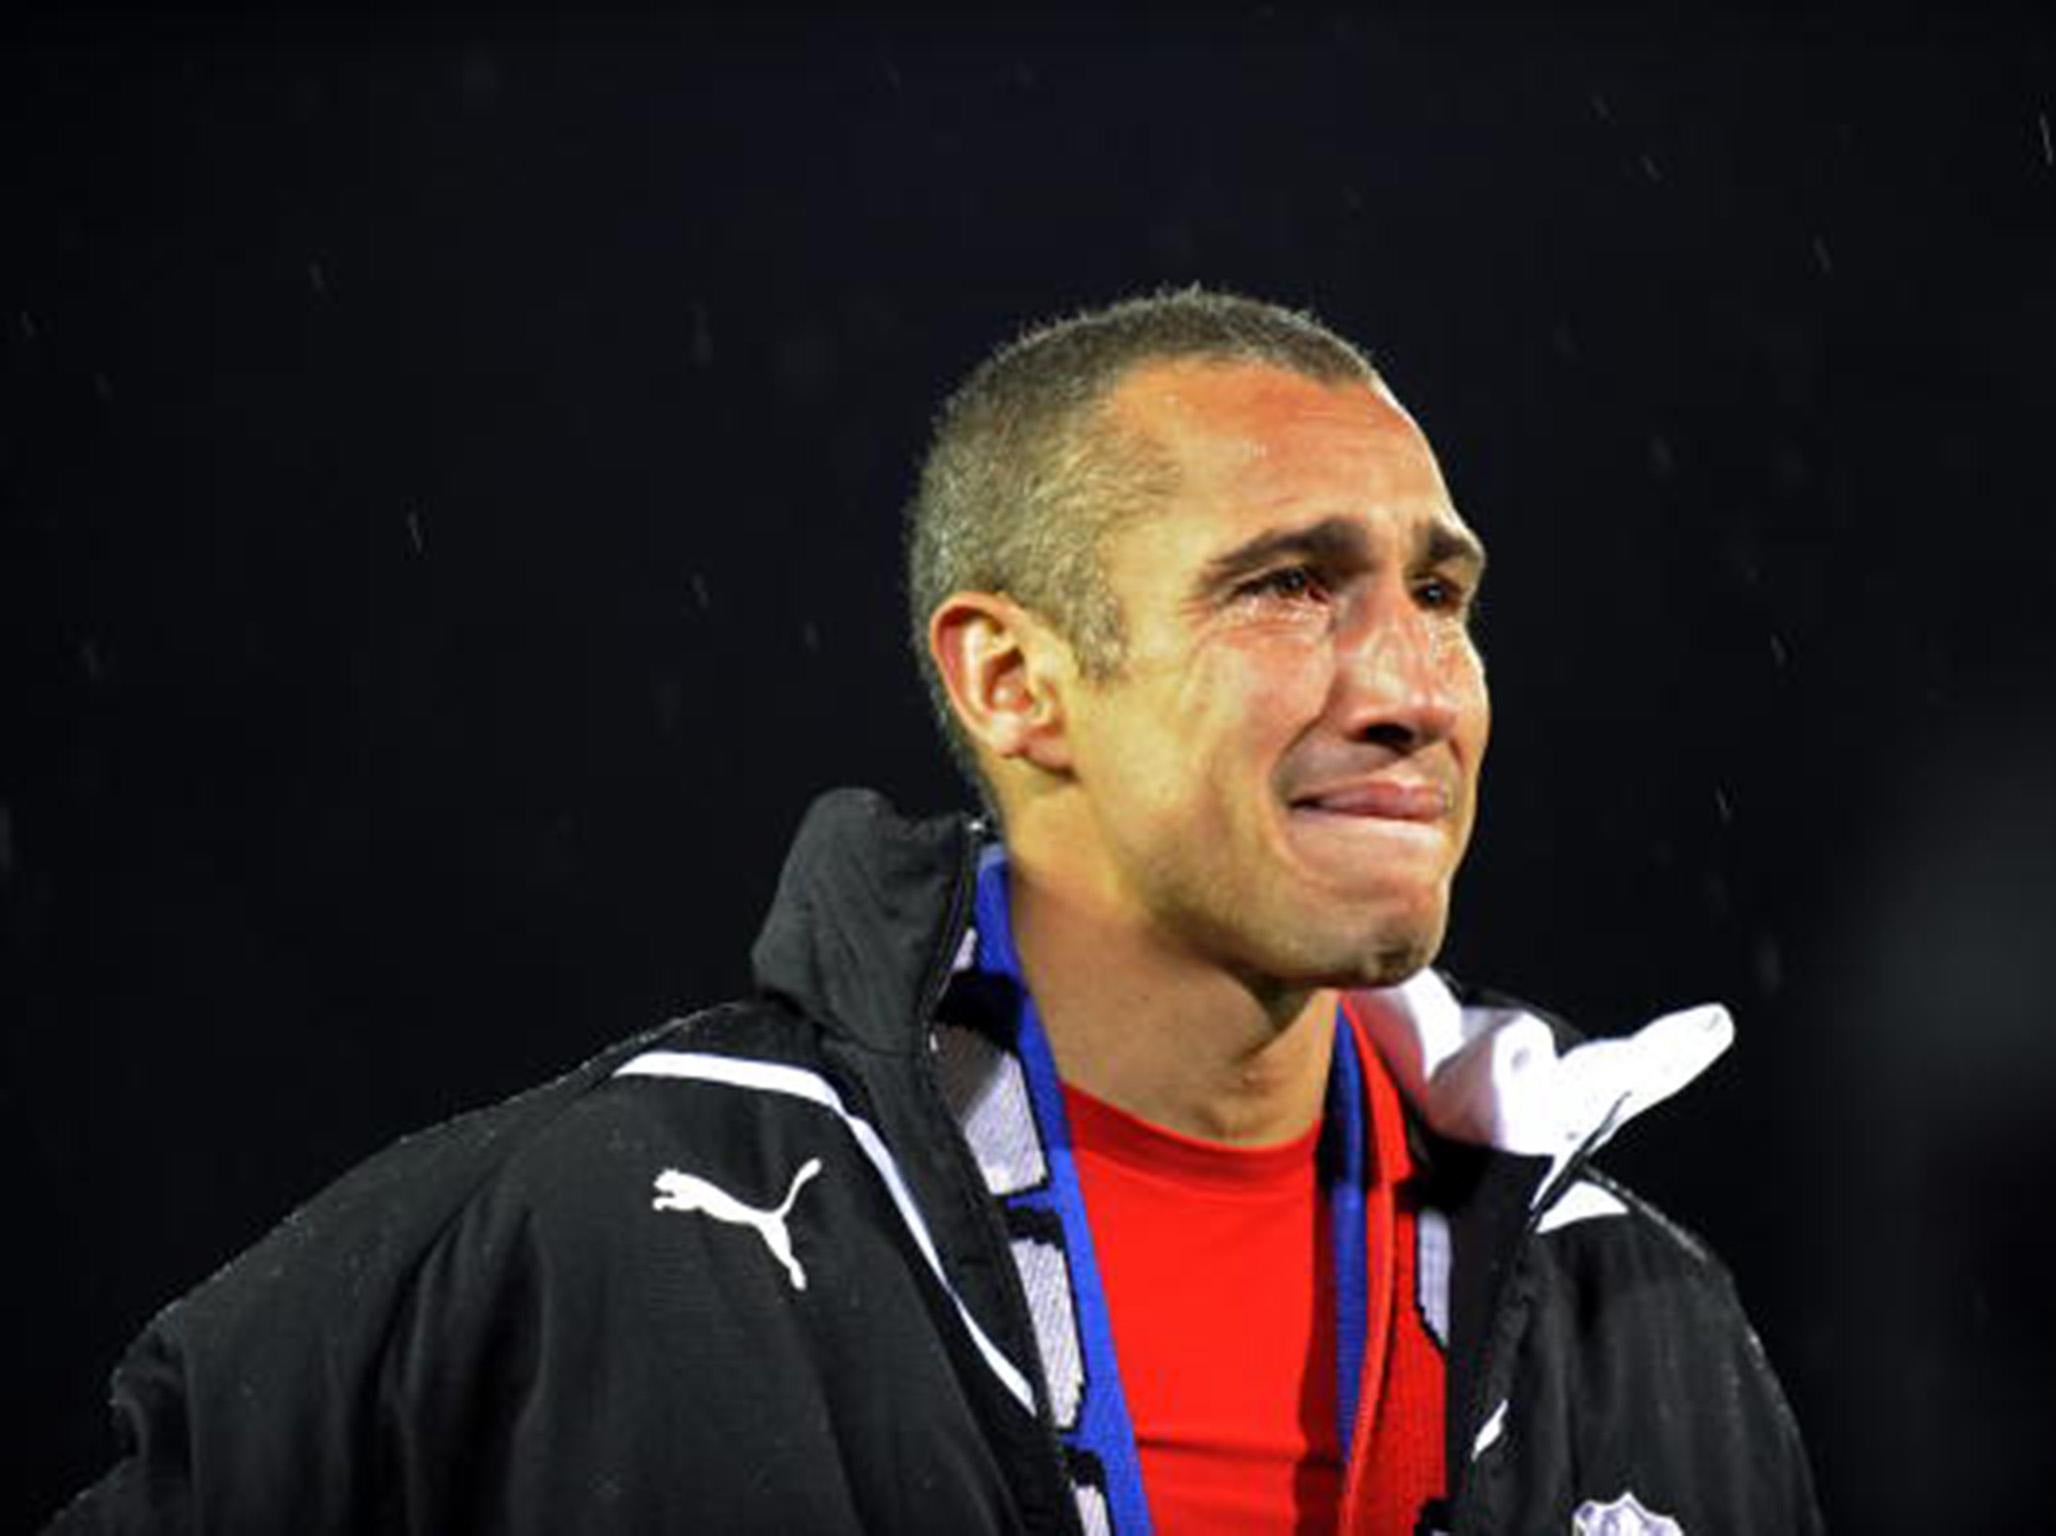 An emotional Larsson in his last match playing for Helsingborg in 2009 (Getty)